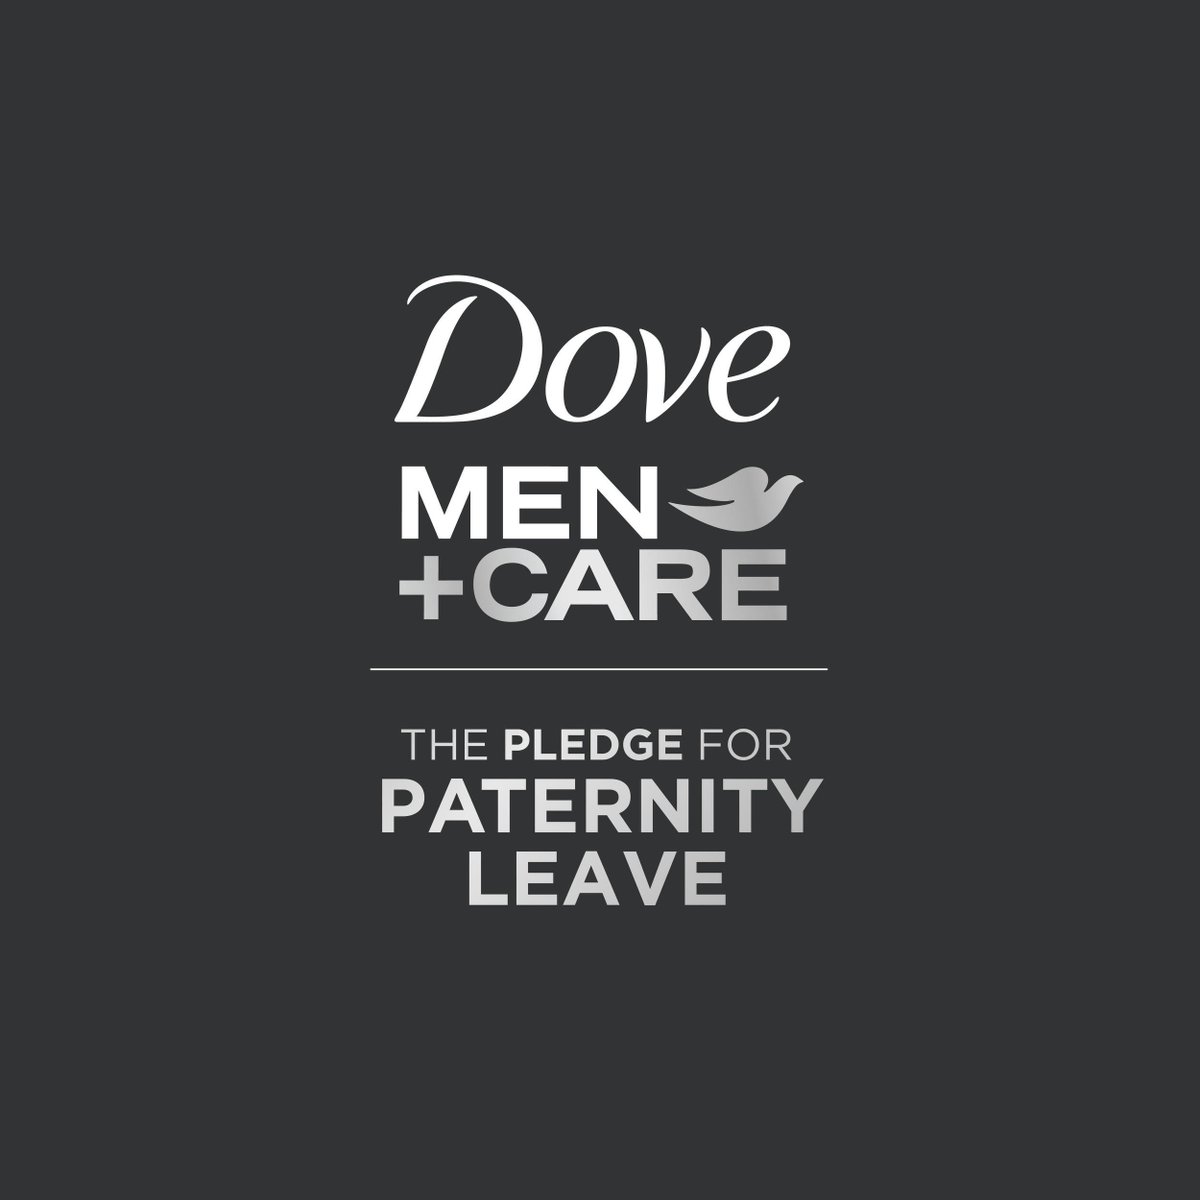 Only 15% of dads in the U.S. have access to paid leave to bond with their newborn. Let's change that. Join me and @dovemencare in pledging for change. #DoveMenPartner #PaternityLeavePledge dovemencare.com/pledge